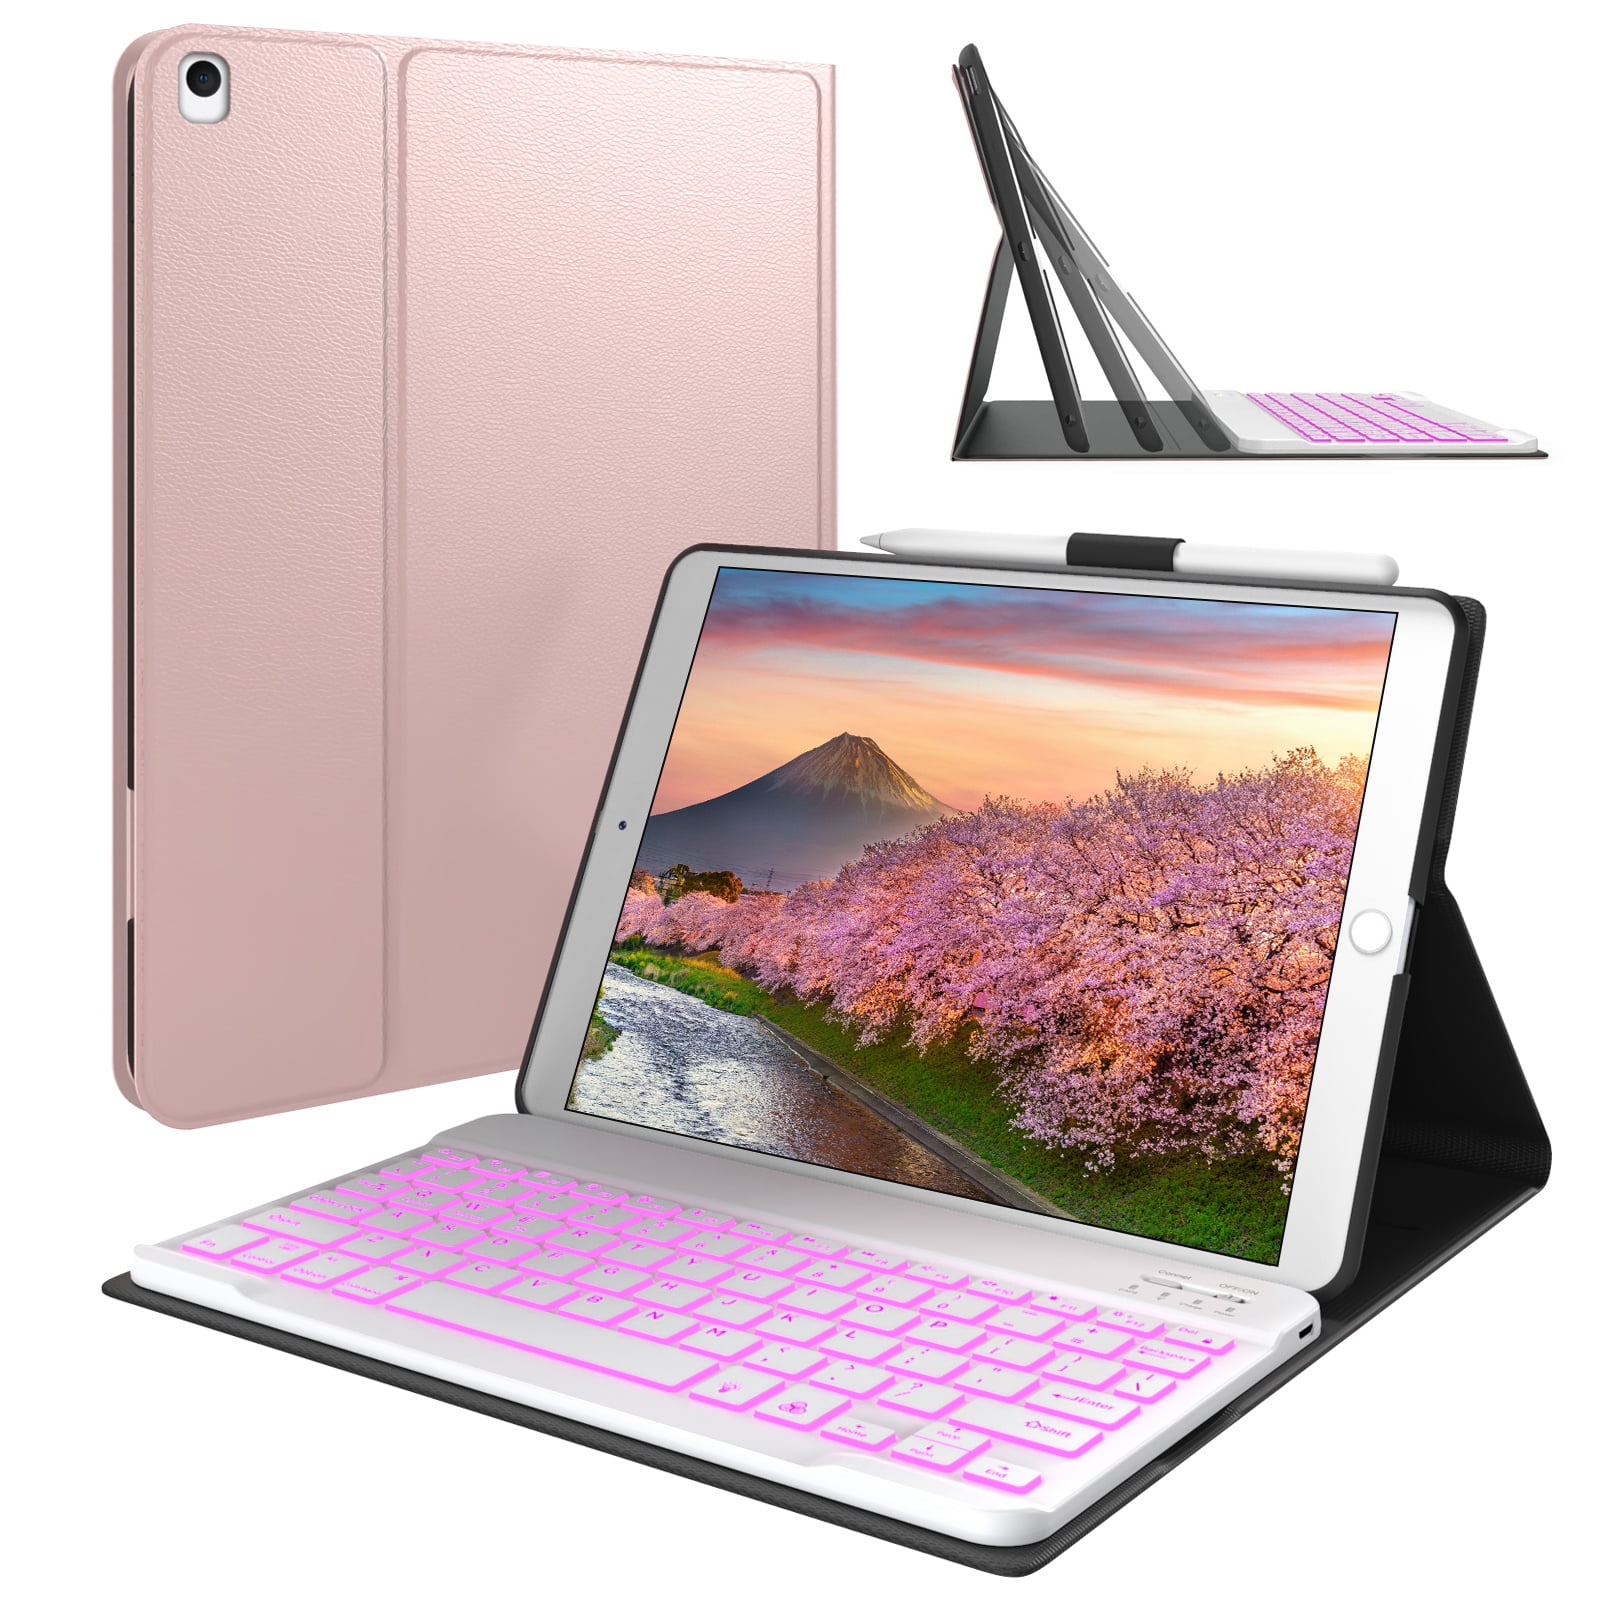 Typecase+Flexbook+Touch+iPad+Pro+11%22+2018+Keyboard+Case+With+